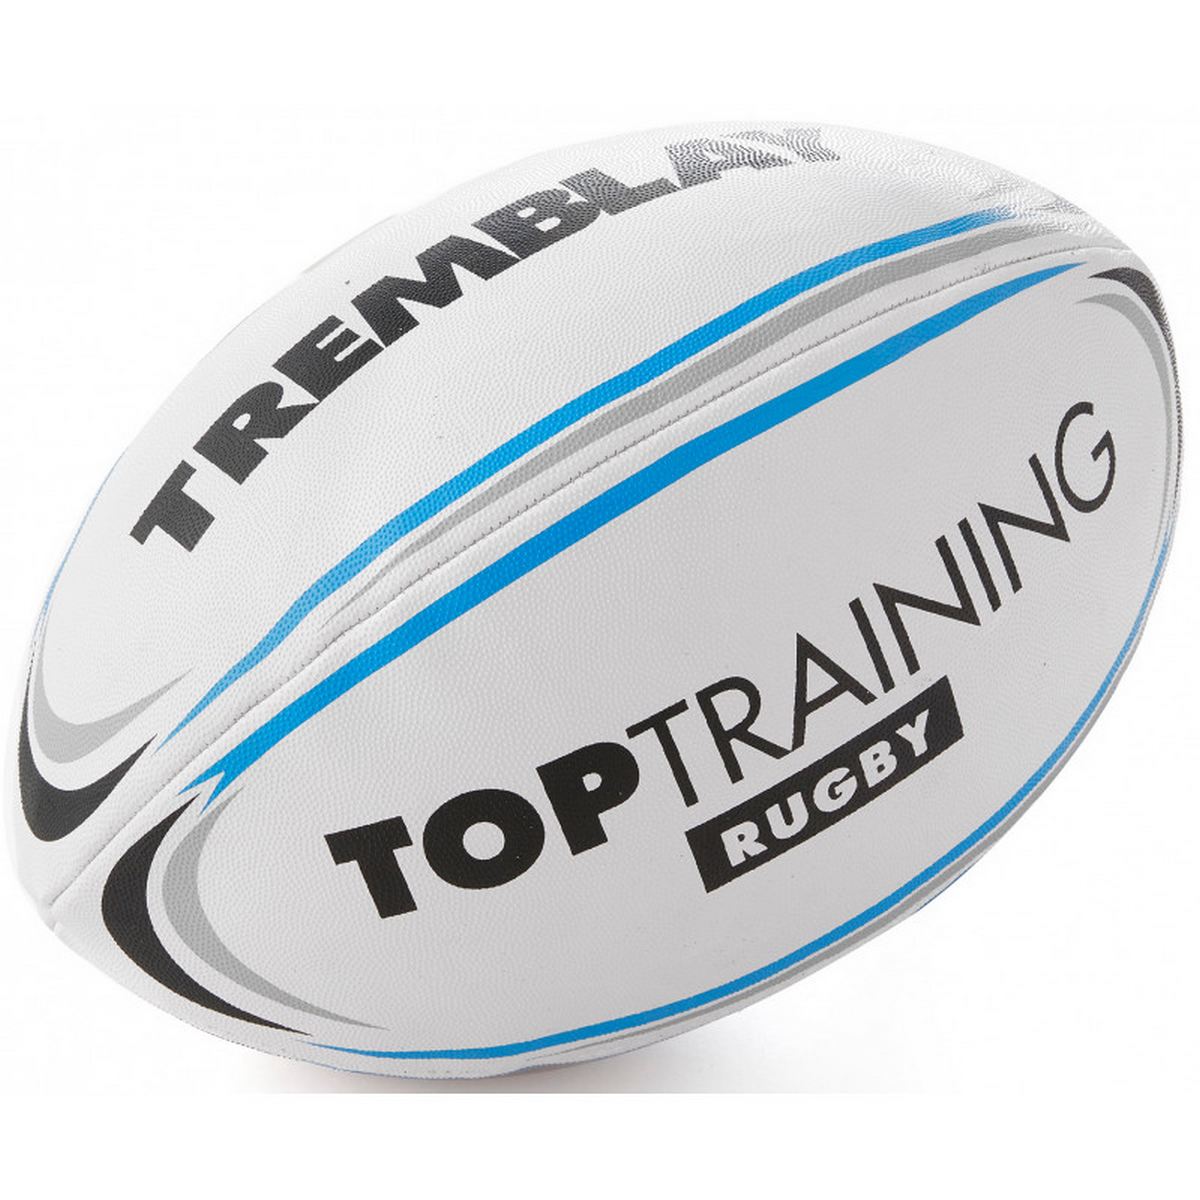 TREMBLAY BALLON DE RUGBY TOP TRAINING Taille 4